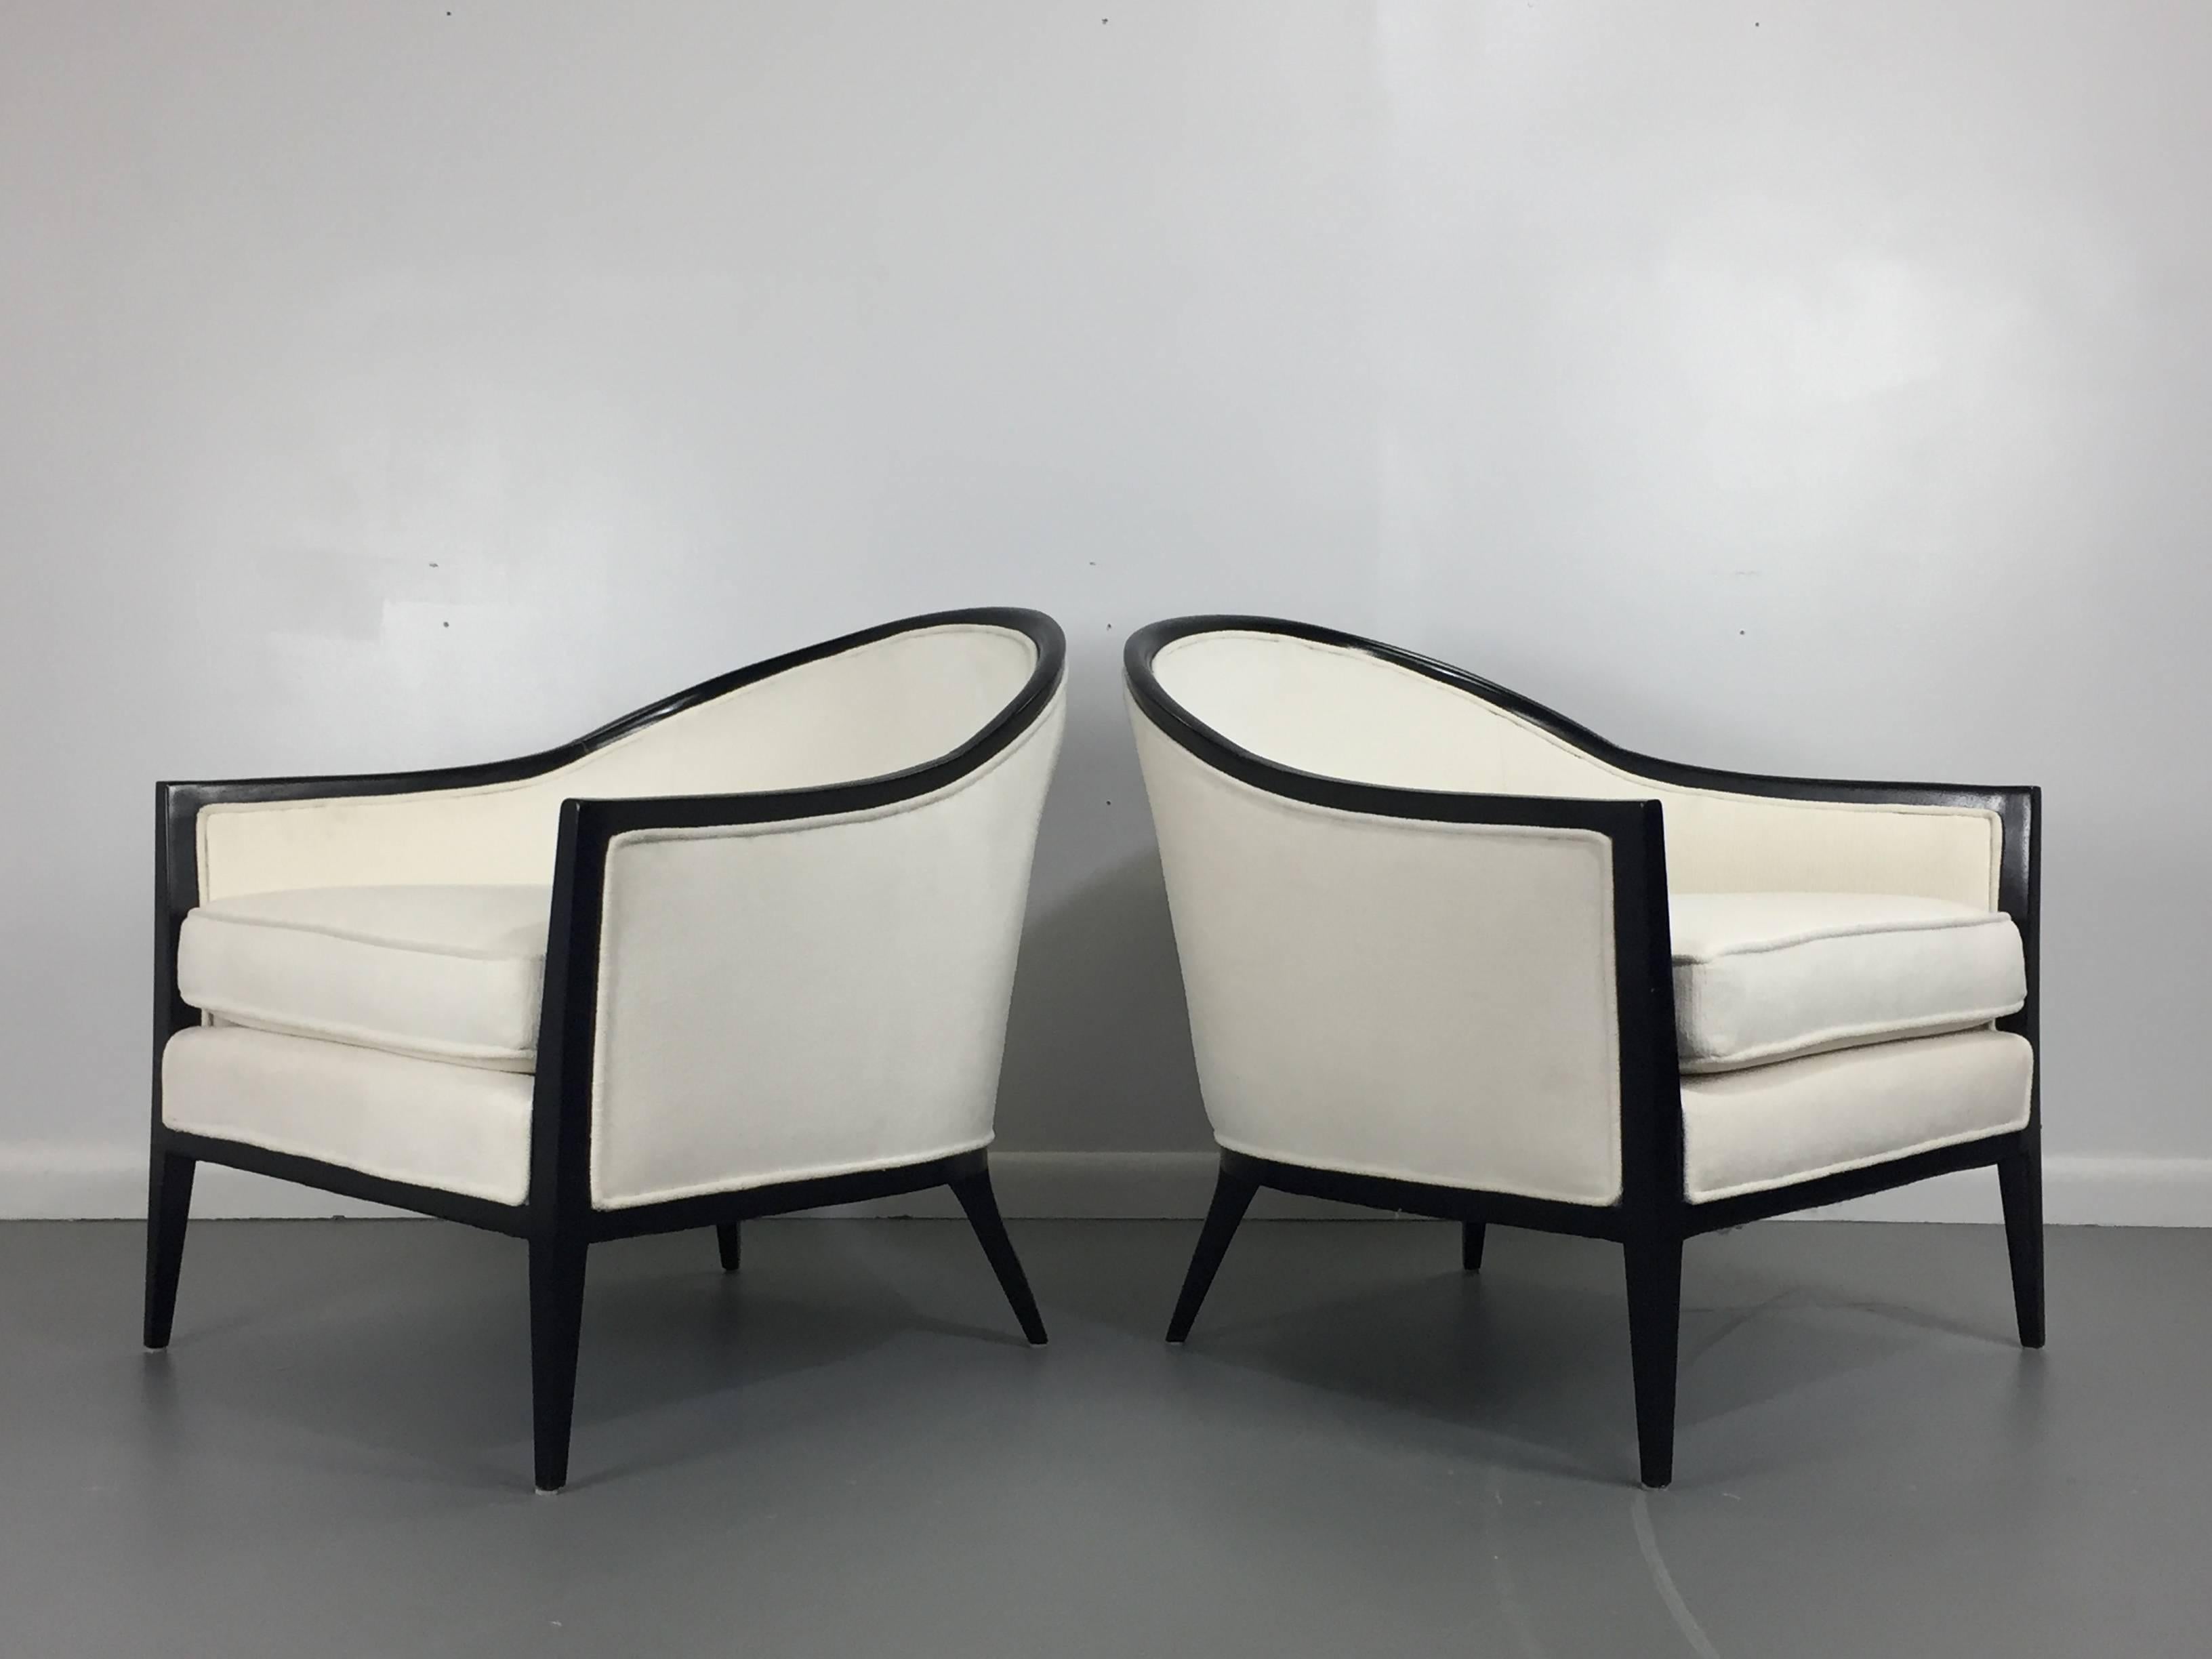 These 1960s Harvey Probber lounge chairs have had a total transformation beginning with a complete renovation of the frame ebonized in a luxurious black. The chairs are upholstered in a beautiful textured white velvet.
 